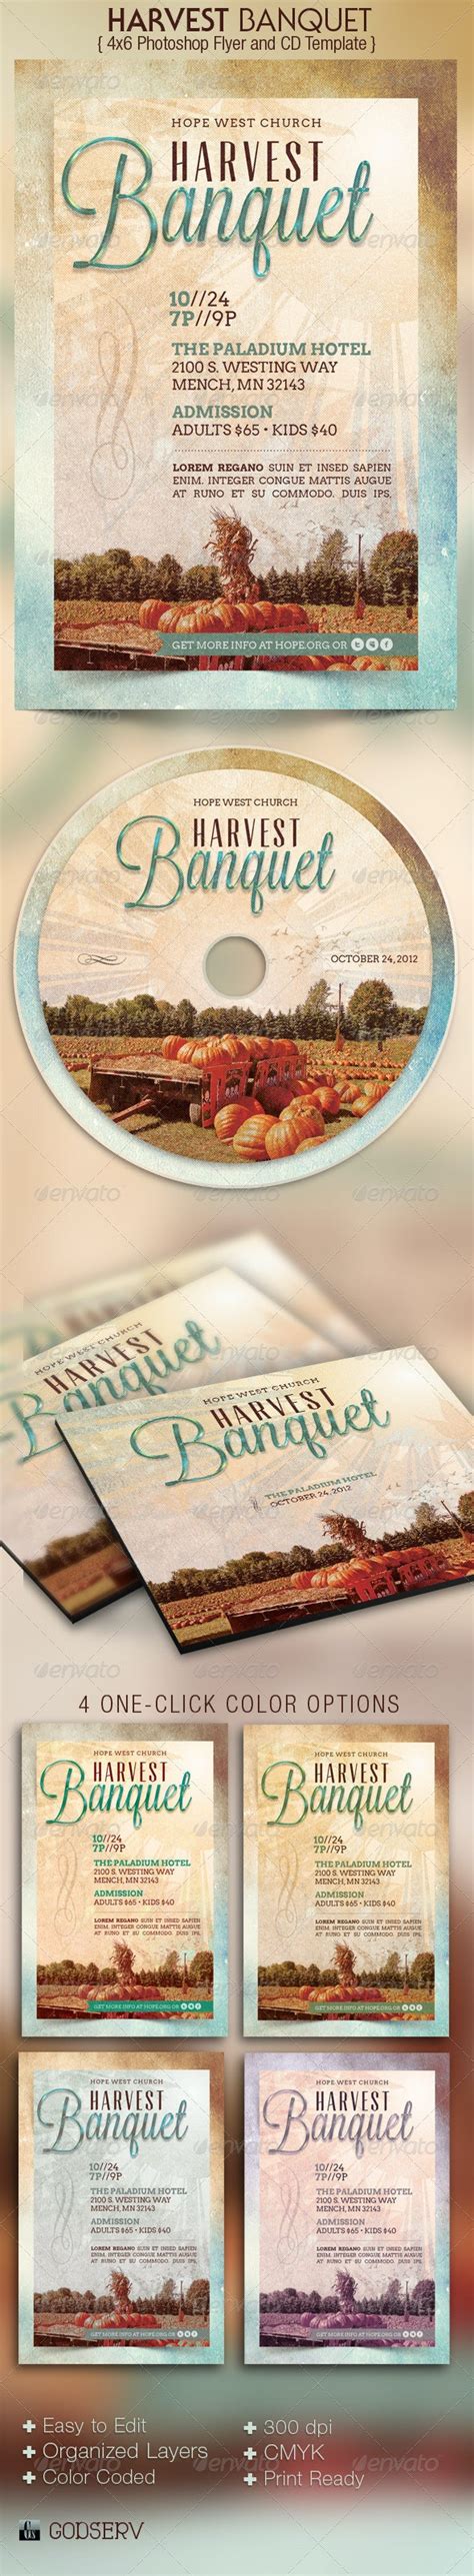 Harvest Banquet Church Flyer Cd Template By Godserv Graphicriver